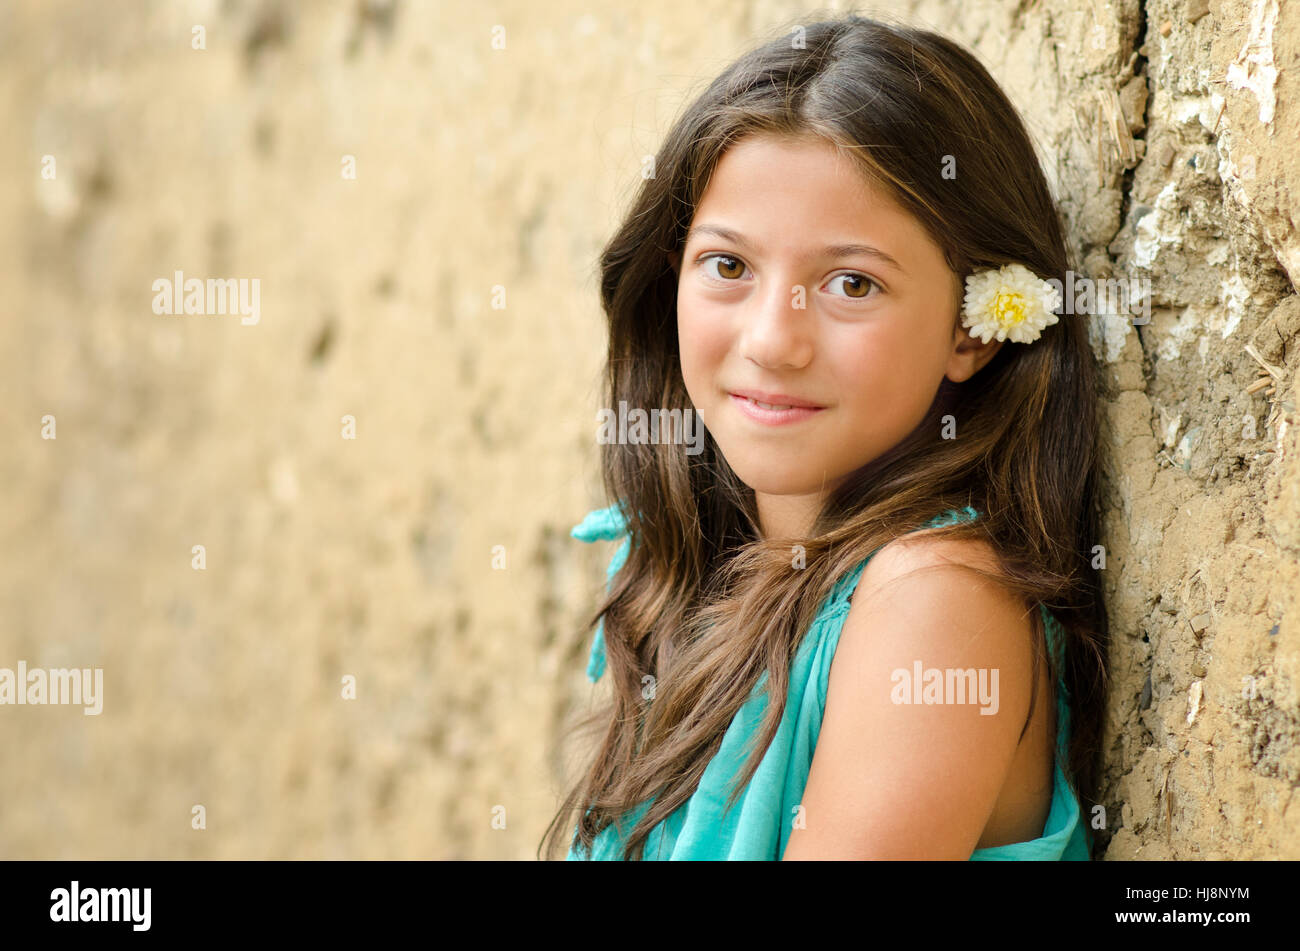 Portrait of a smiling girl with a flower in her hair Stock Photo